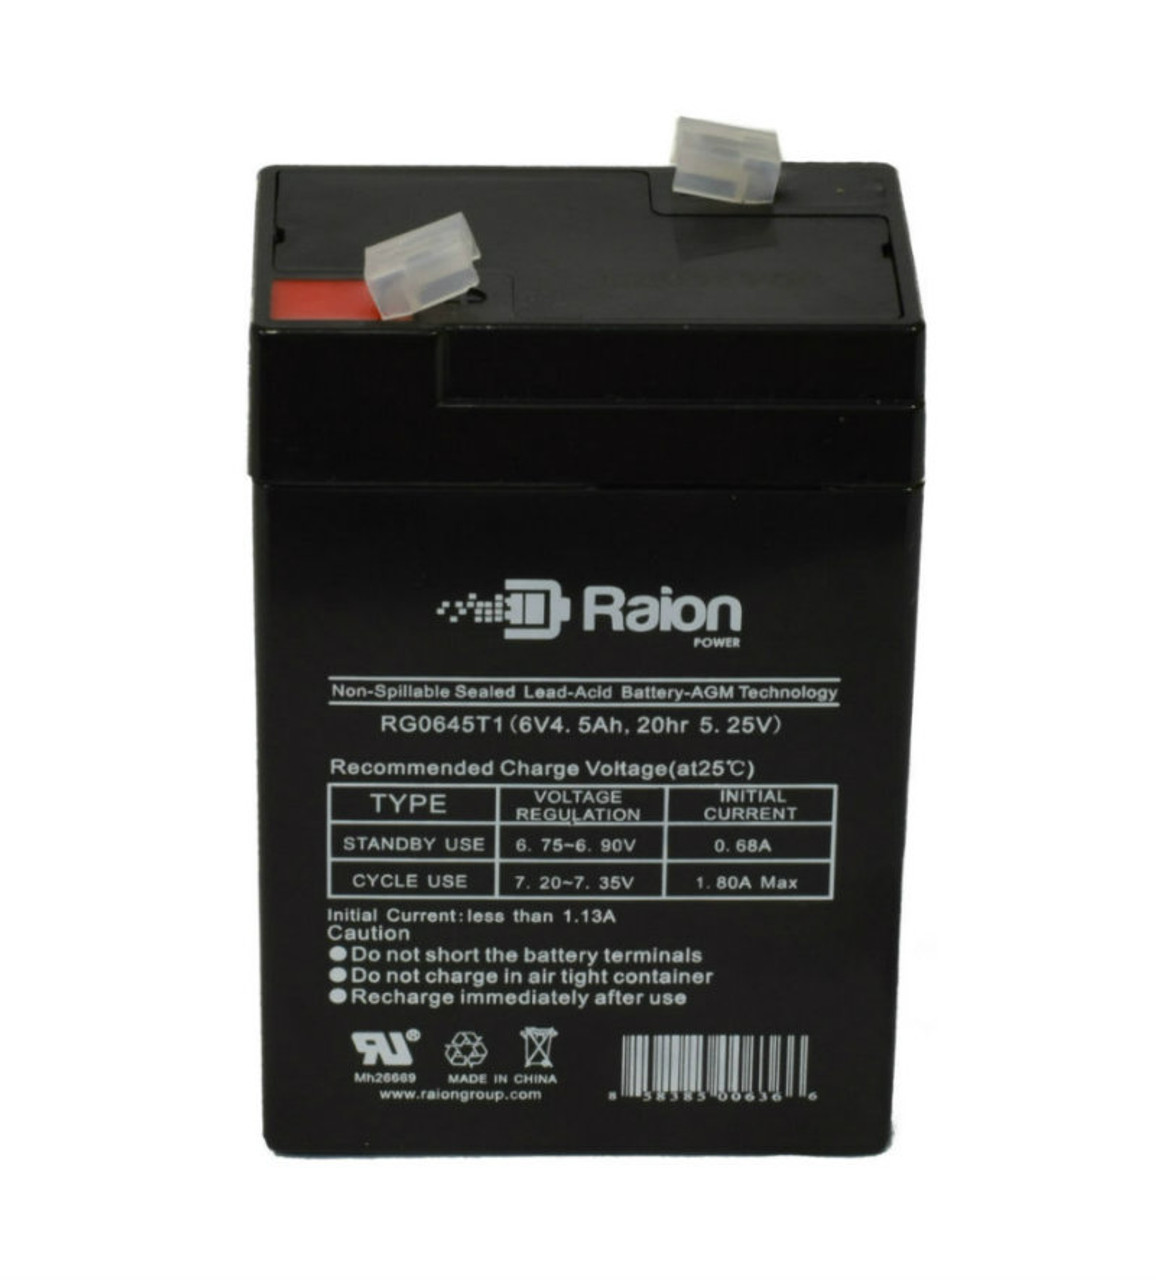 Raion Power RG0645T1 Replacement Battery Cartridge for Leadhoo NP4.5-6